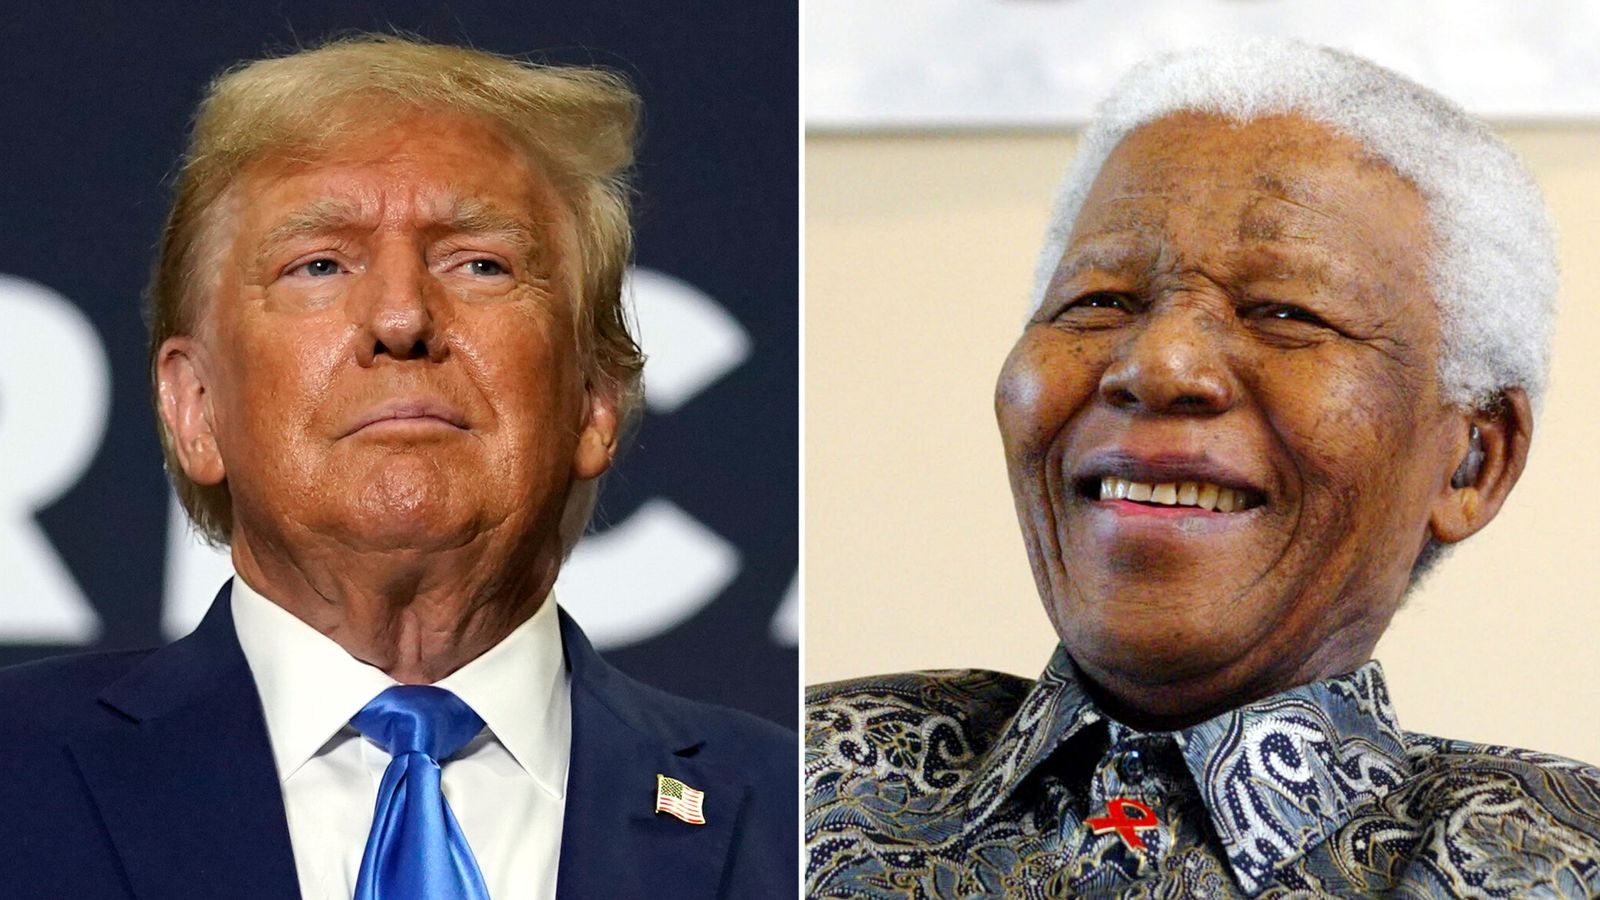 Donald Trump compares himself to Nelson Mandela as he rallies against criminal charges